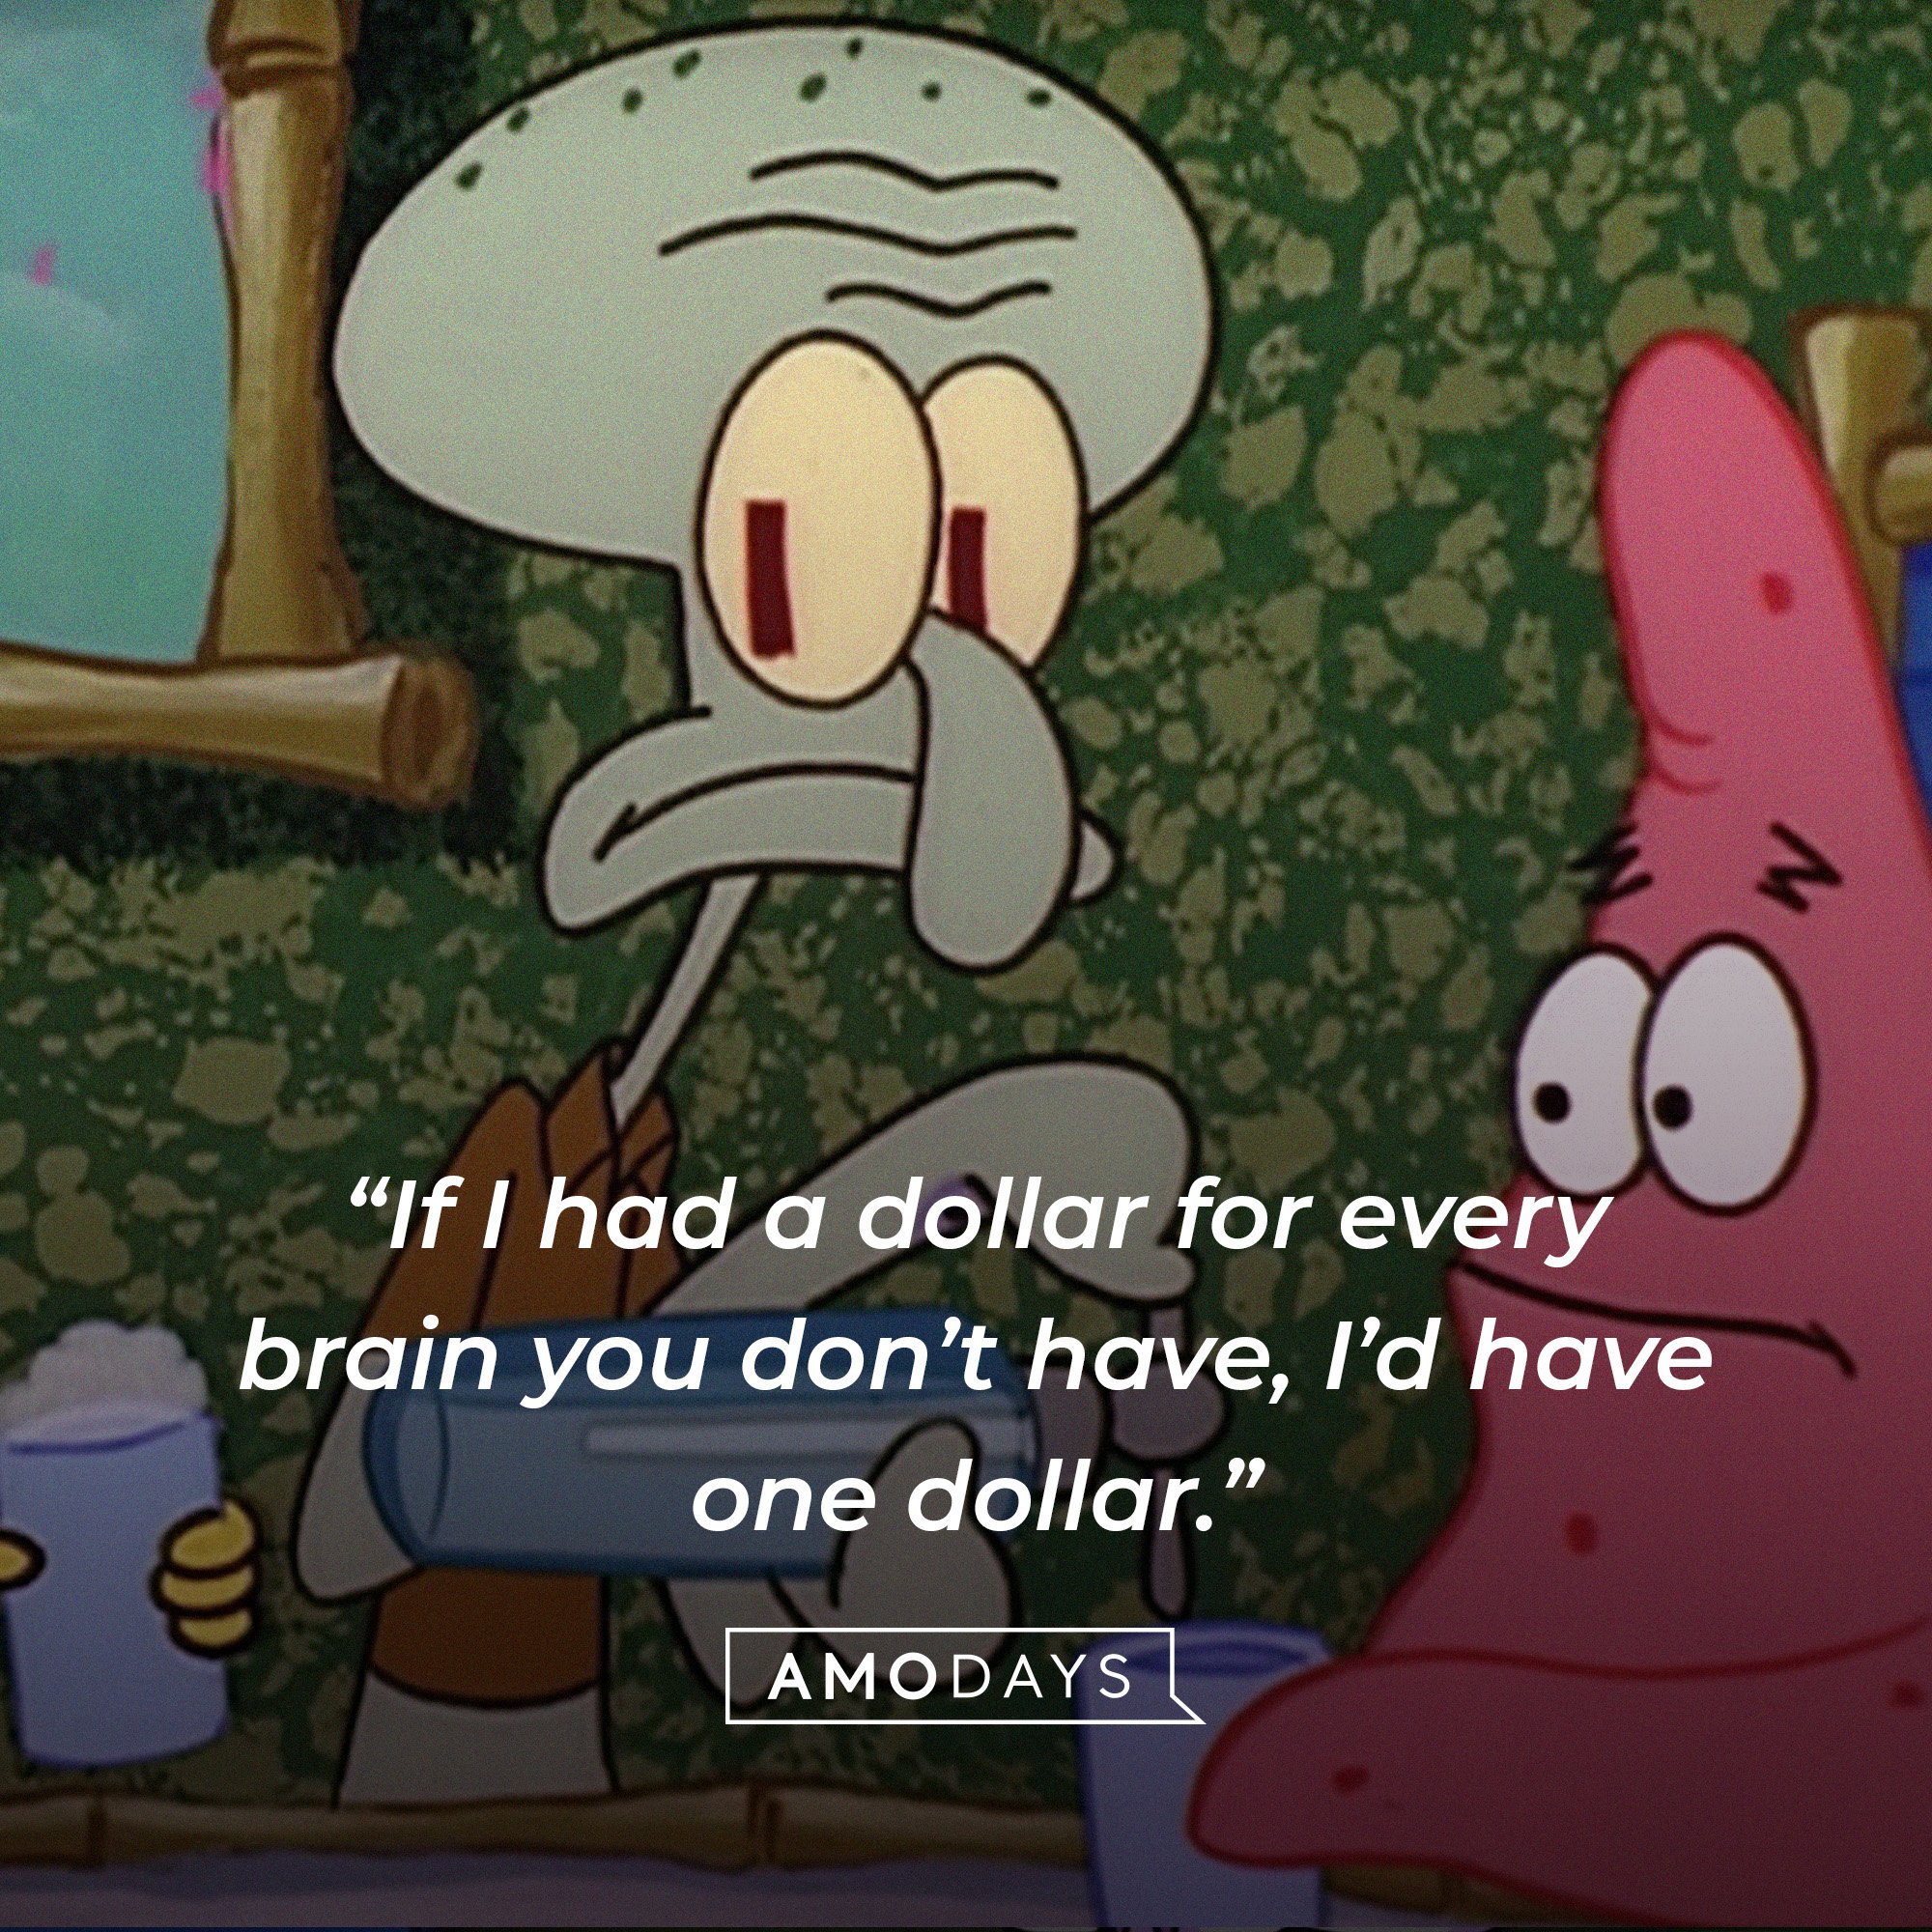 Squidward Tentacles’ quote: “If I had a dollar for every brain you don’t have, I’d have one dollar.” | Source: AmoDays